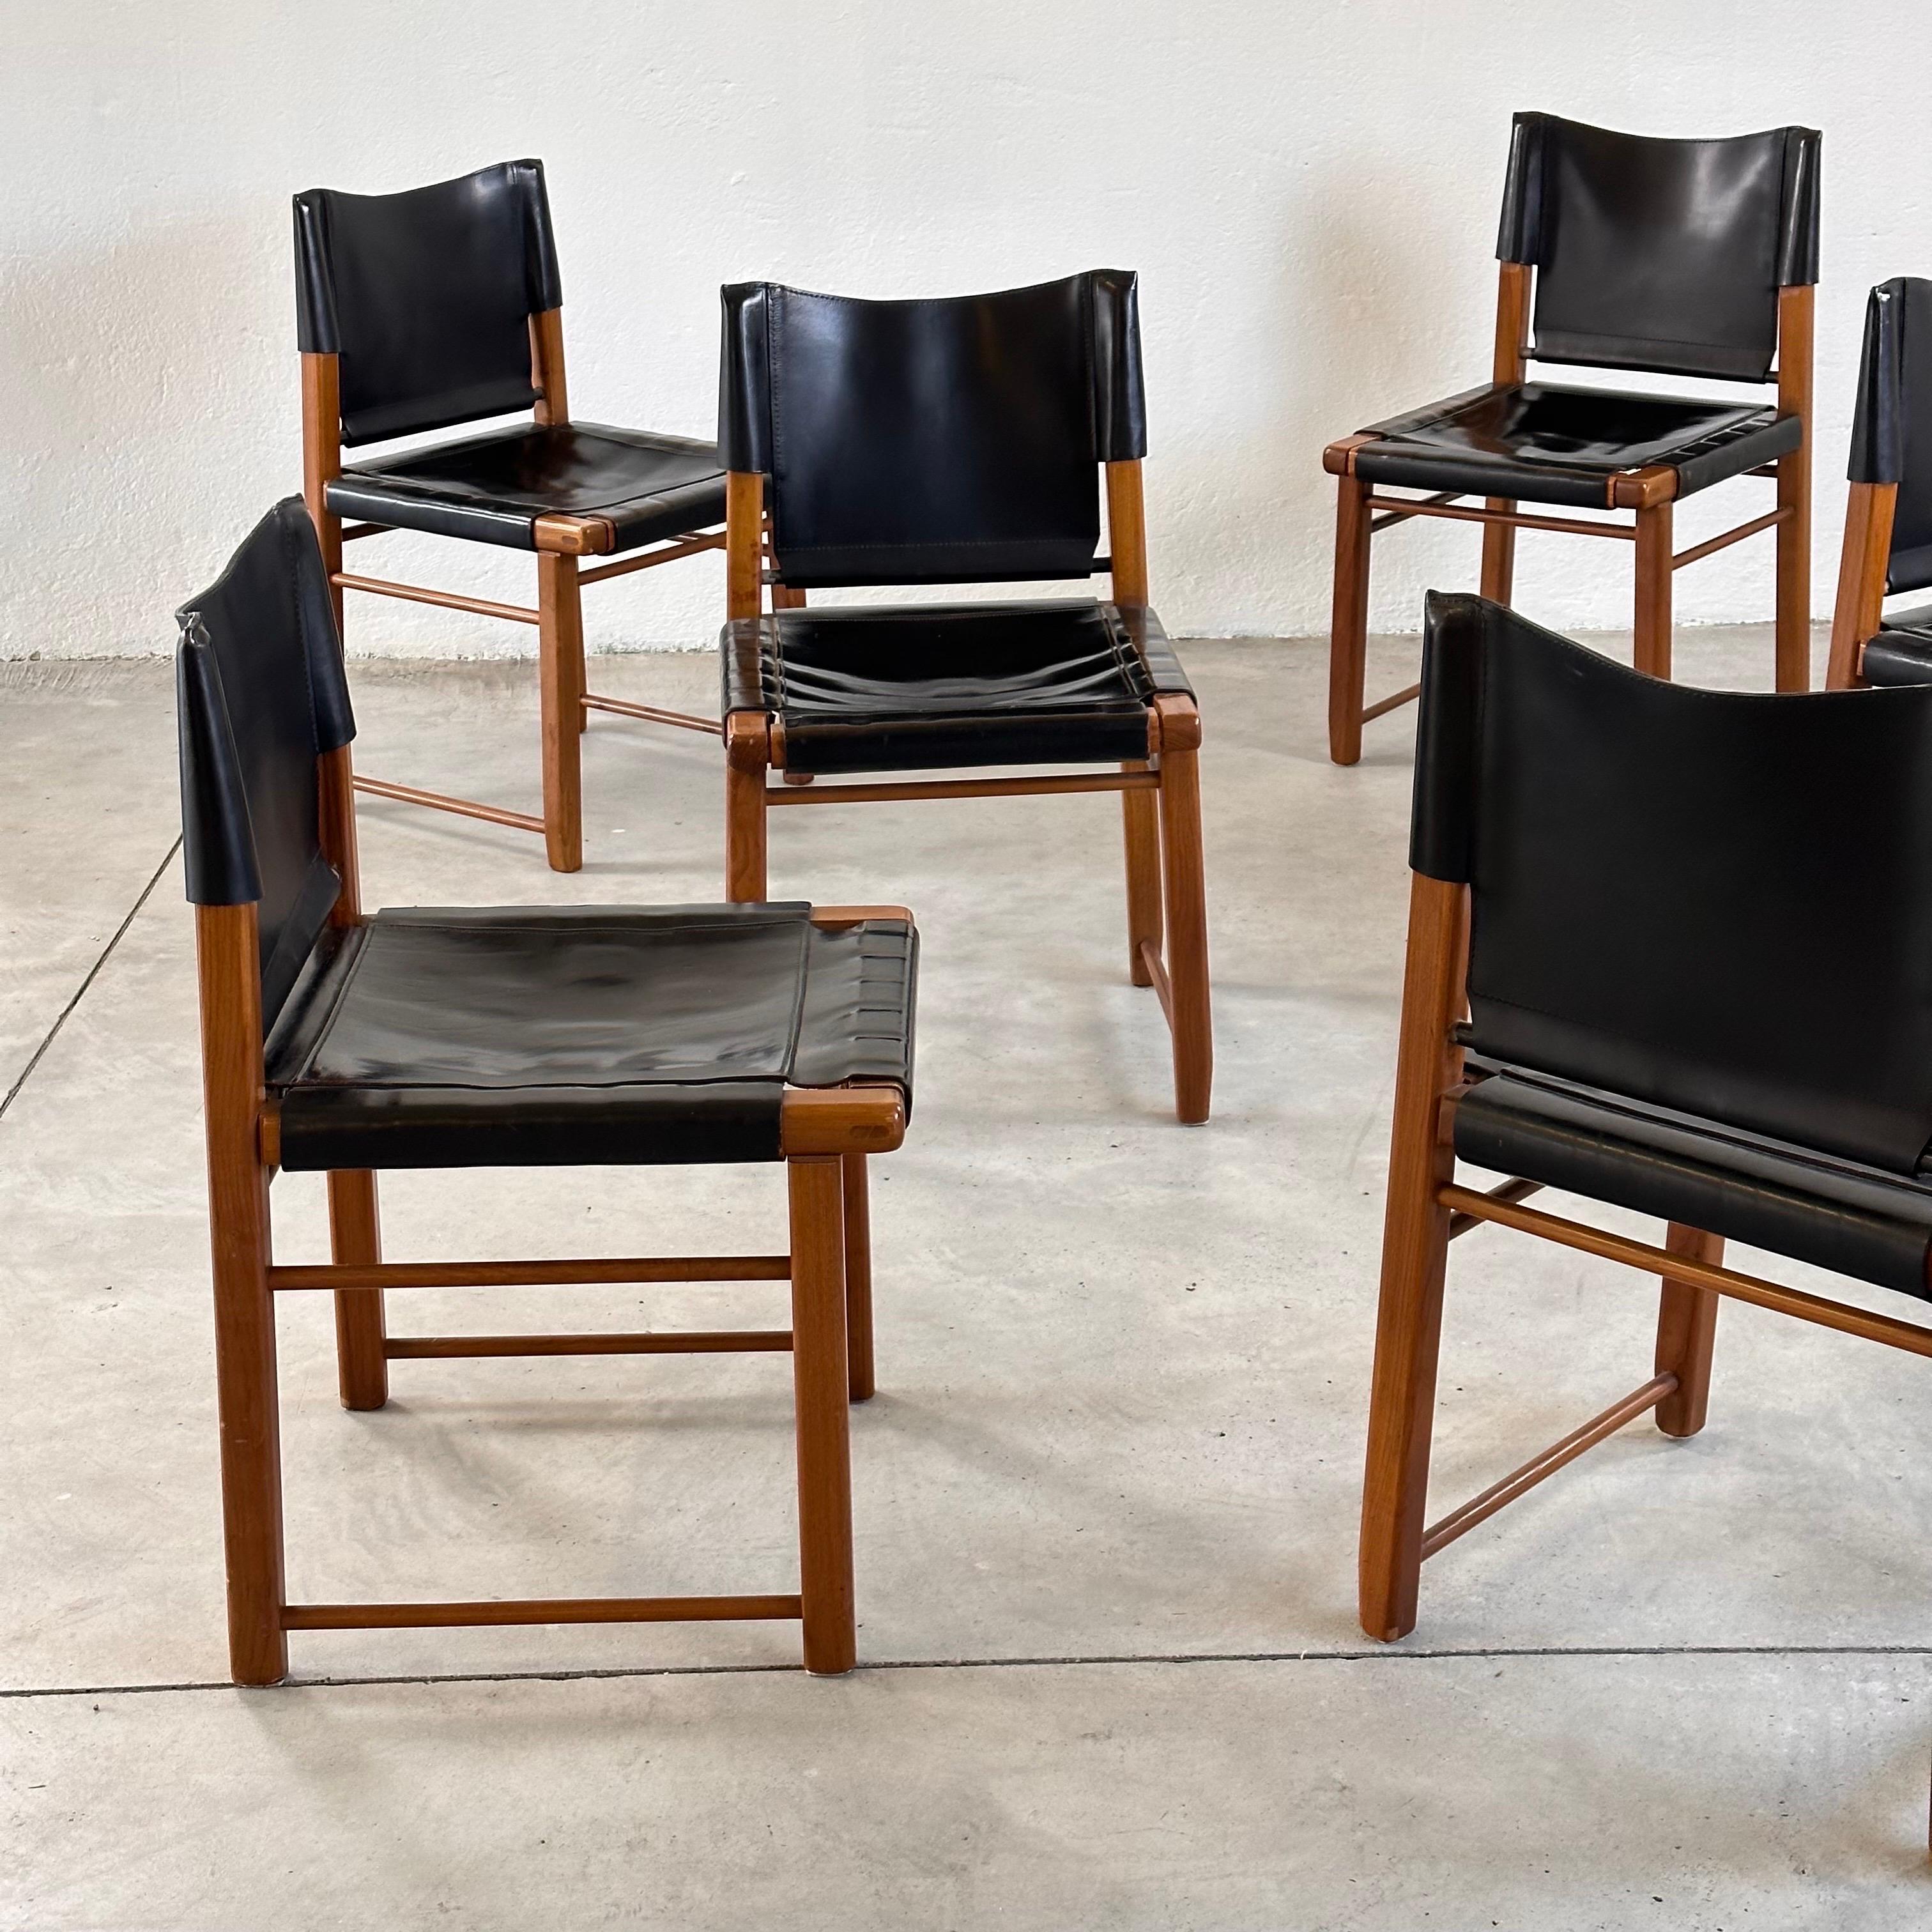 Chic Italian Elegance: Set of Six Walnut and Black Leather Dining Chairs, 1970s For Sale 1